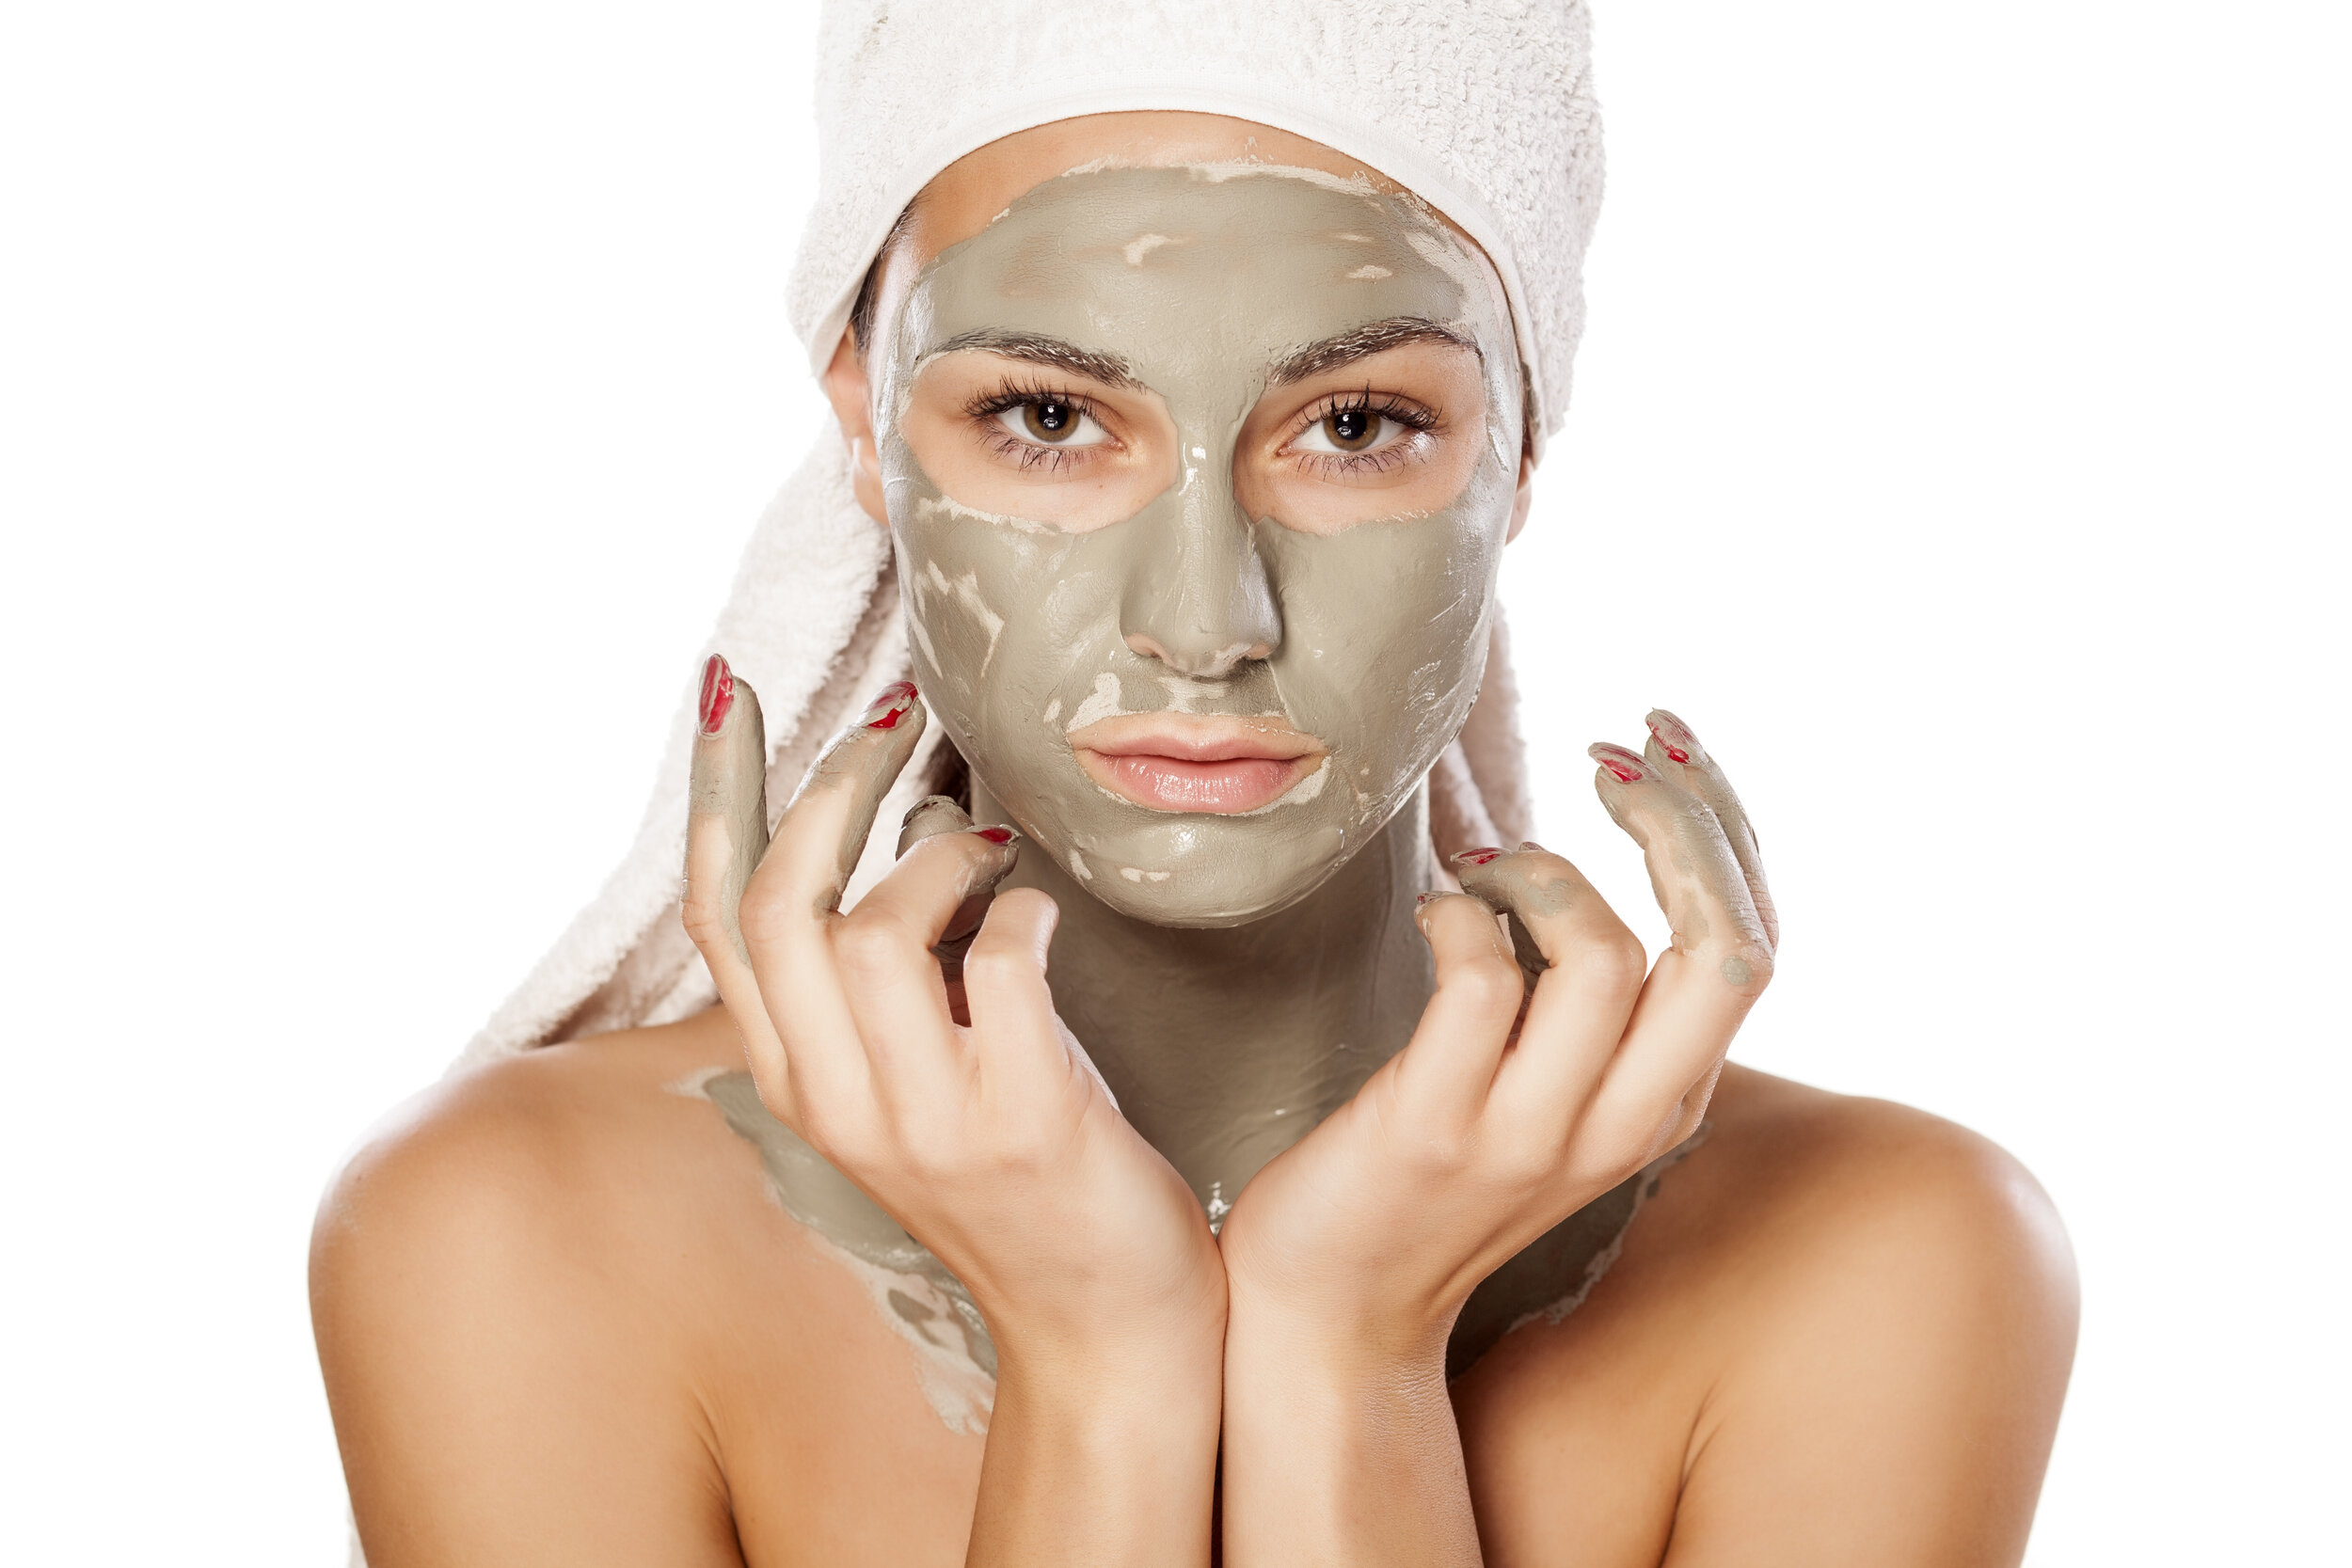 Sweet Almond Bentonite Clay Face Mask - Essentials for our Life